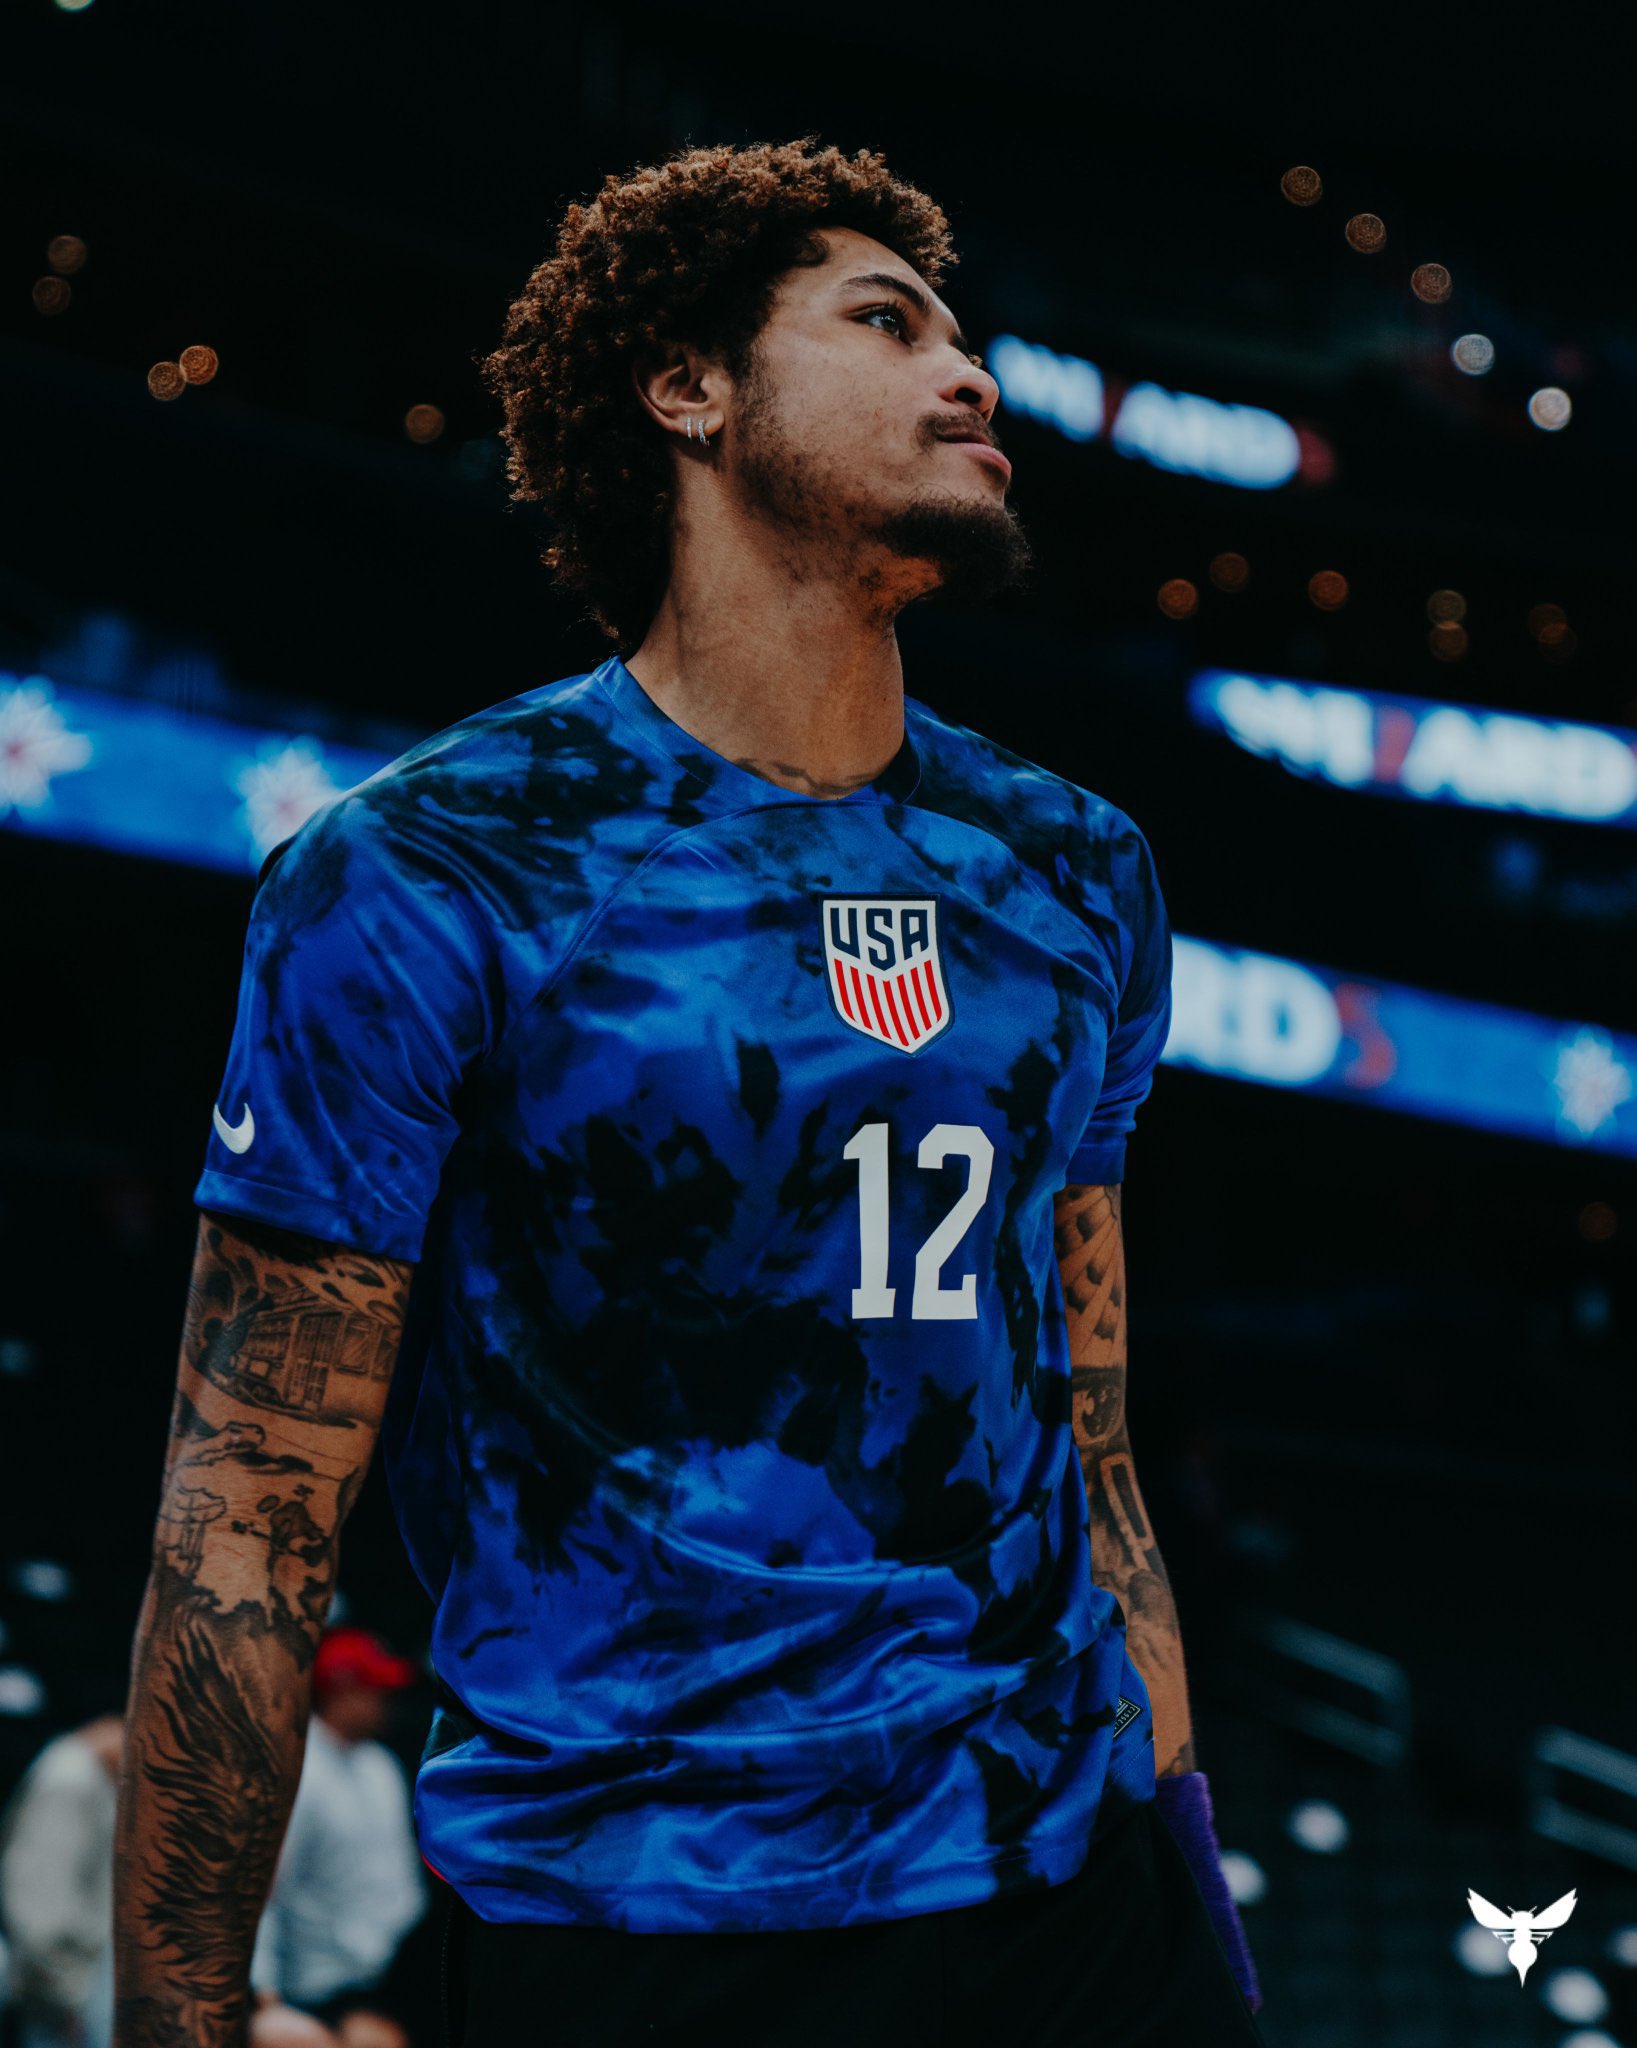 USMNT Only on X: Kelly Oubre Jr. of the @Hornets rocking the